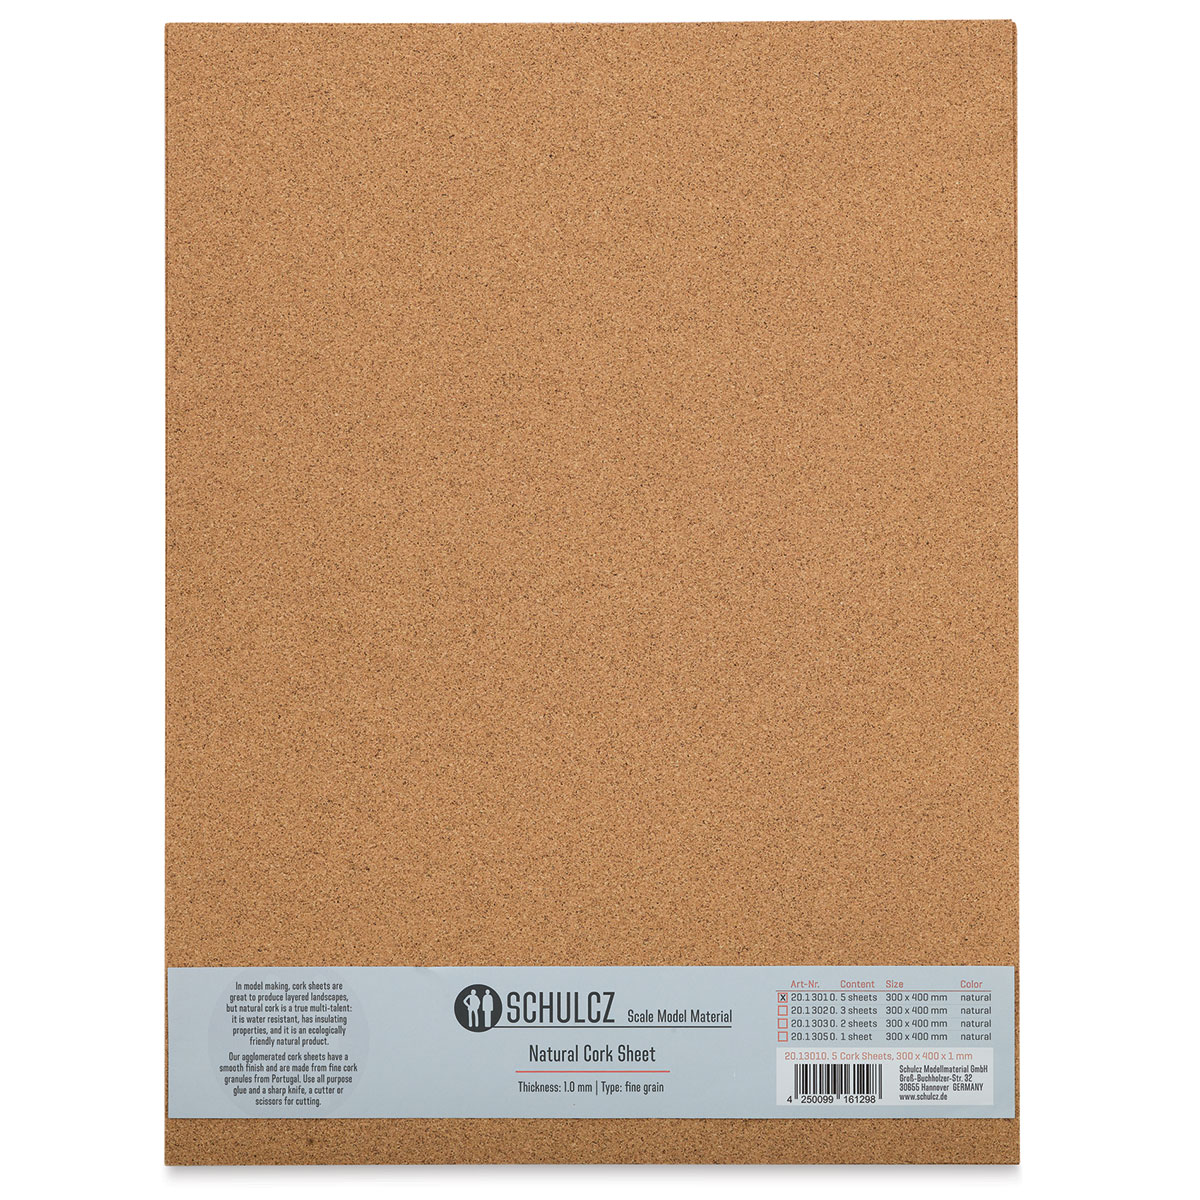 Schulcz Scale Model Cork Sheets - 11-3/4 inch x 15-3/4 inch, 1 mm, Pkg of 5 Sheets, Size: One Size